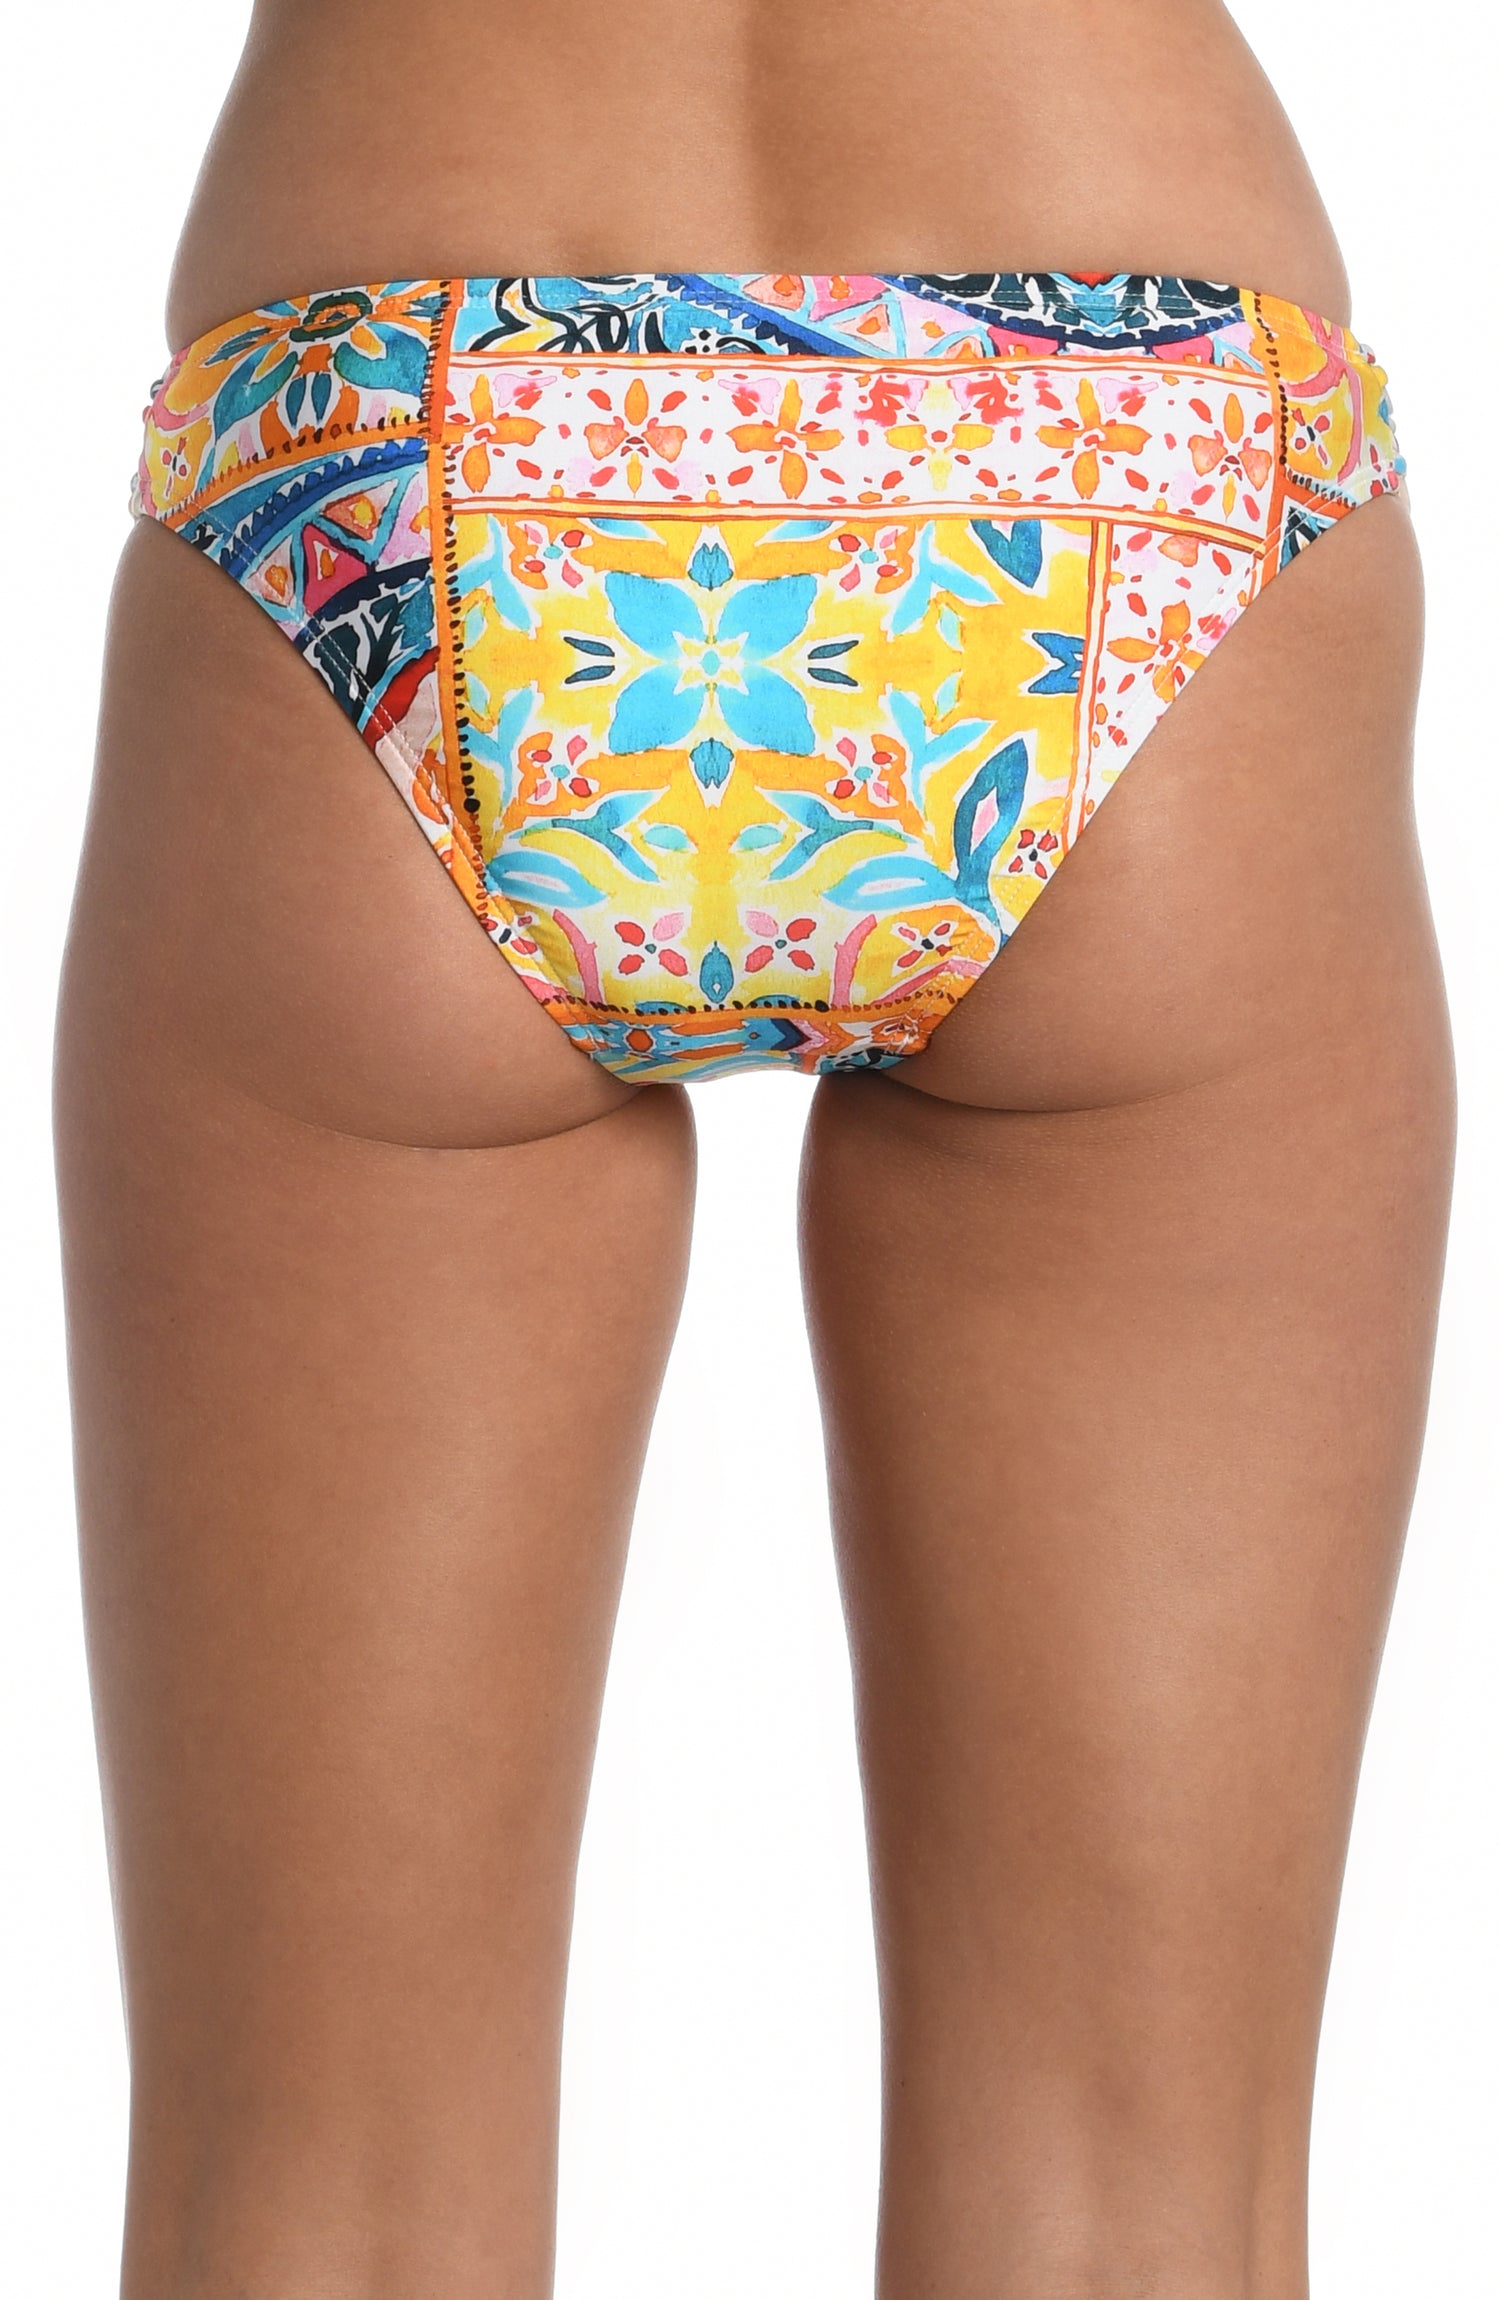 Model is wearing a moroccan inspired multi colored printed shirred hipster bottom from our Soleil collection!